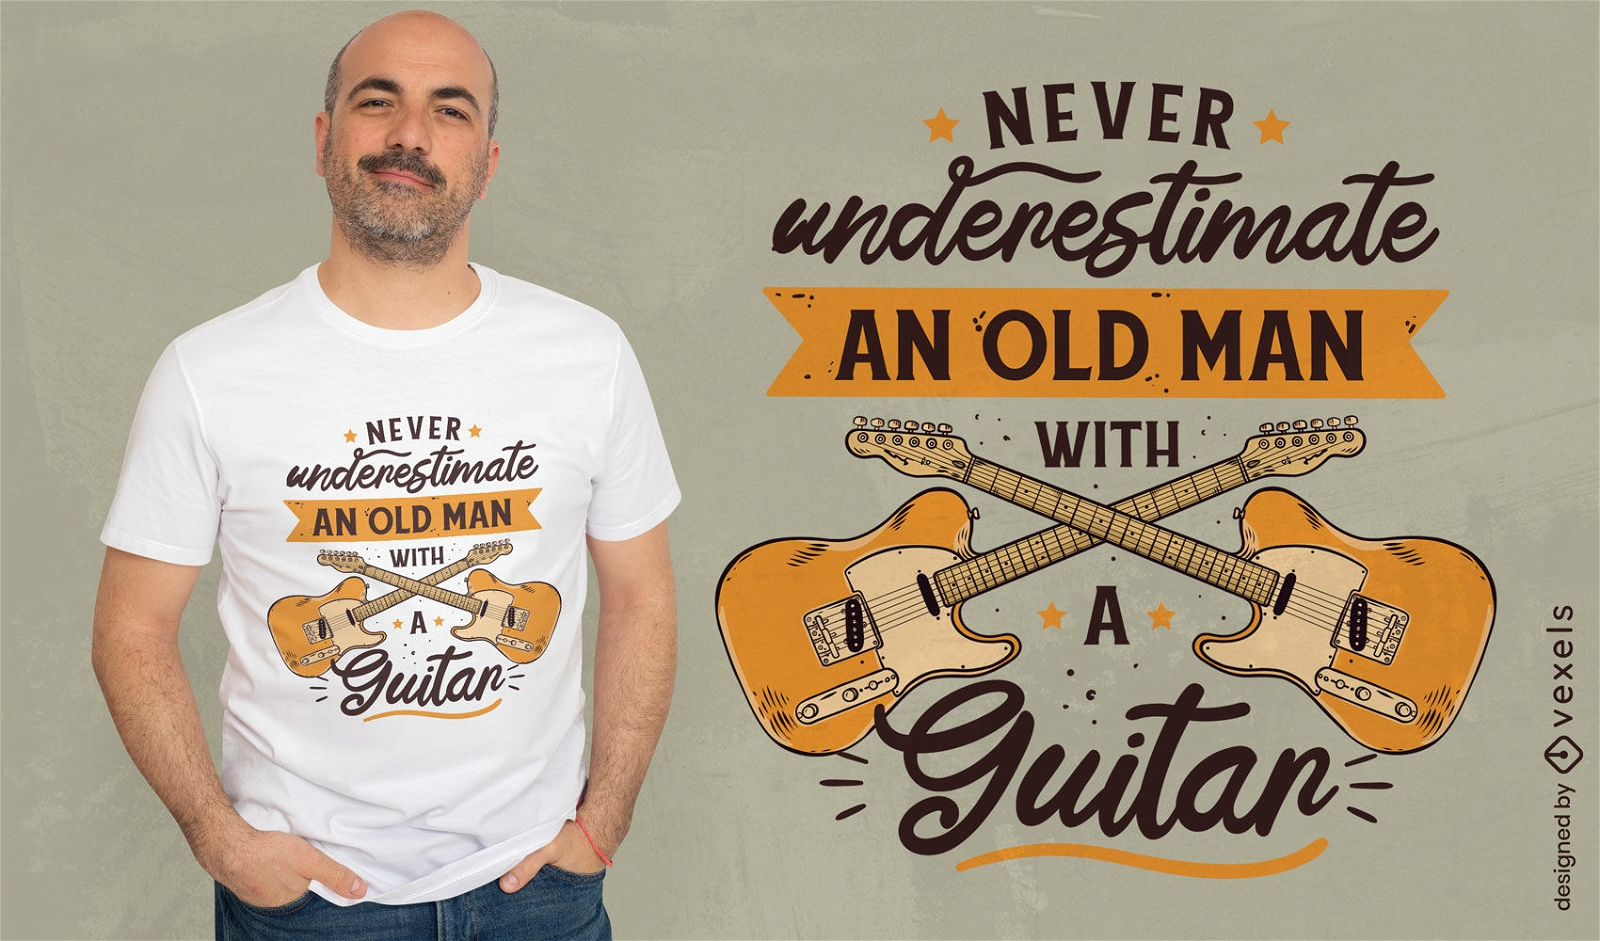 Old man with guitar quote t-shirt design